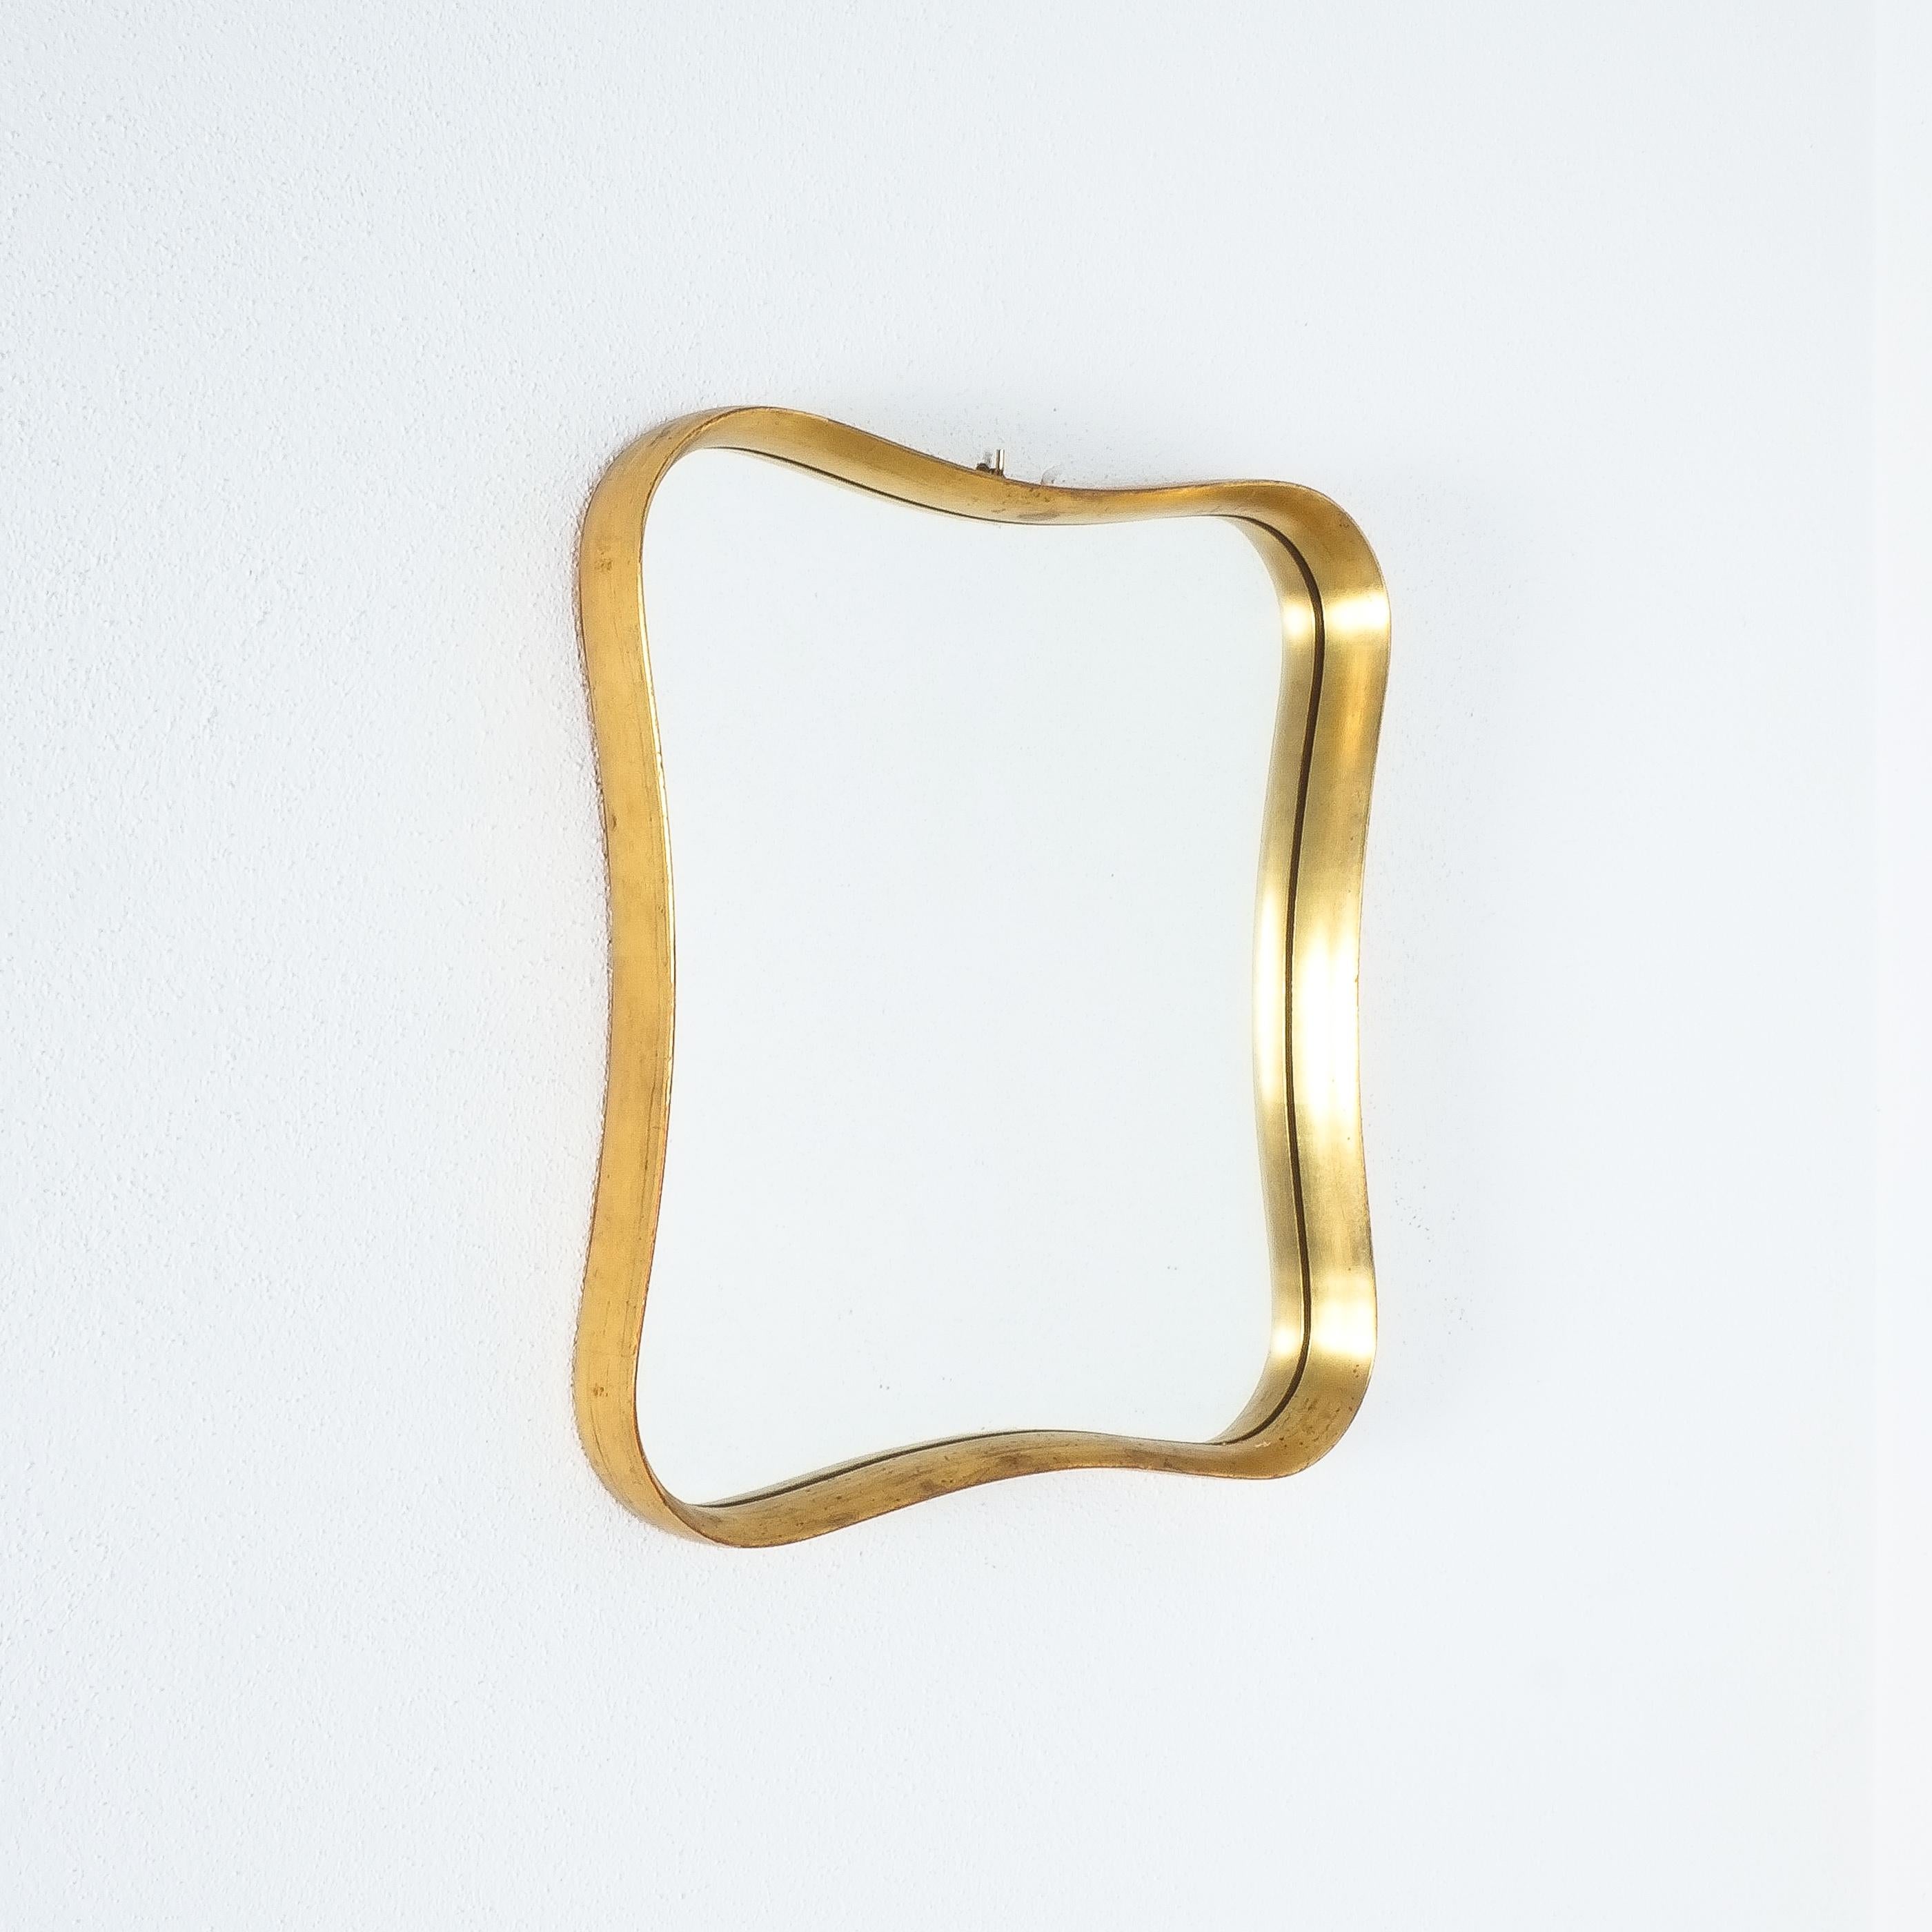 Mid-20th Century Gold Leaf Mirror Classical Shape, Midcentury, France For Sale